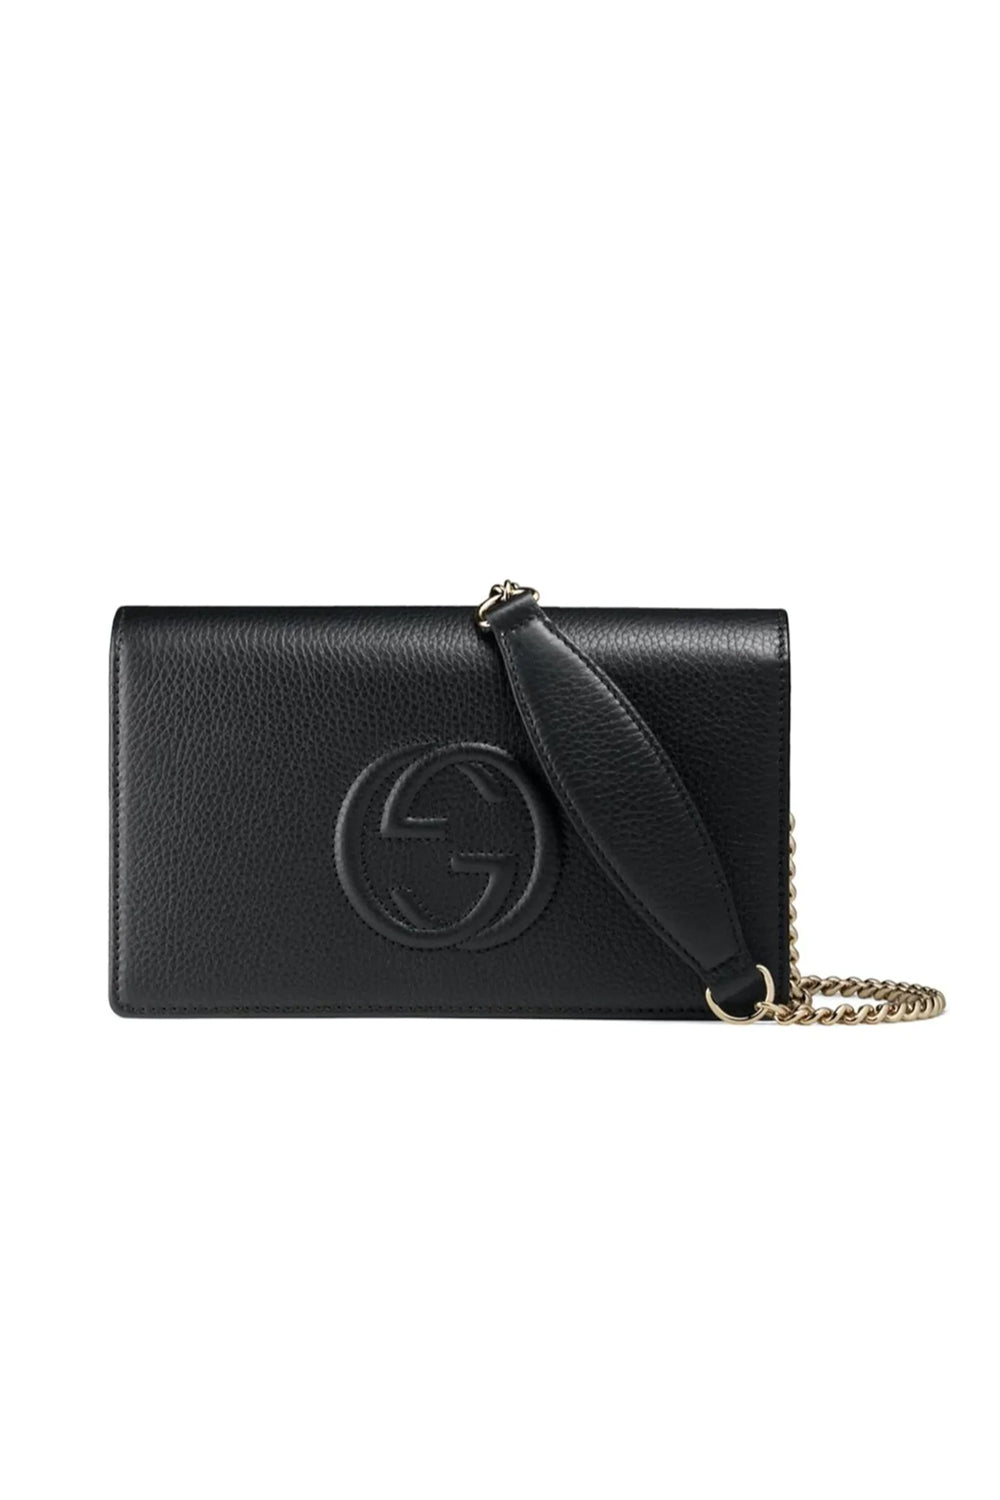 Gucci Soho Wallet on Chain Leather Crossbody Bag